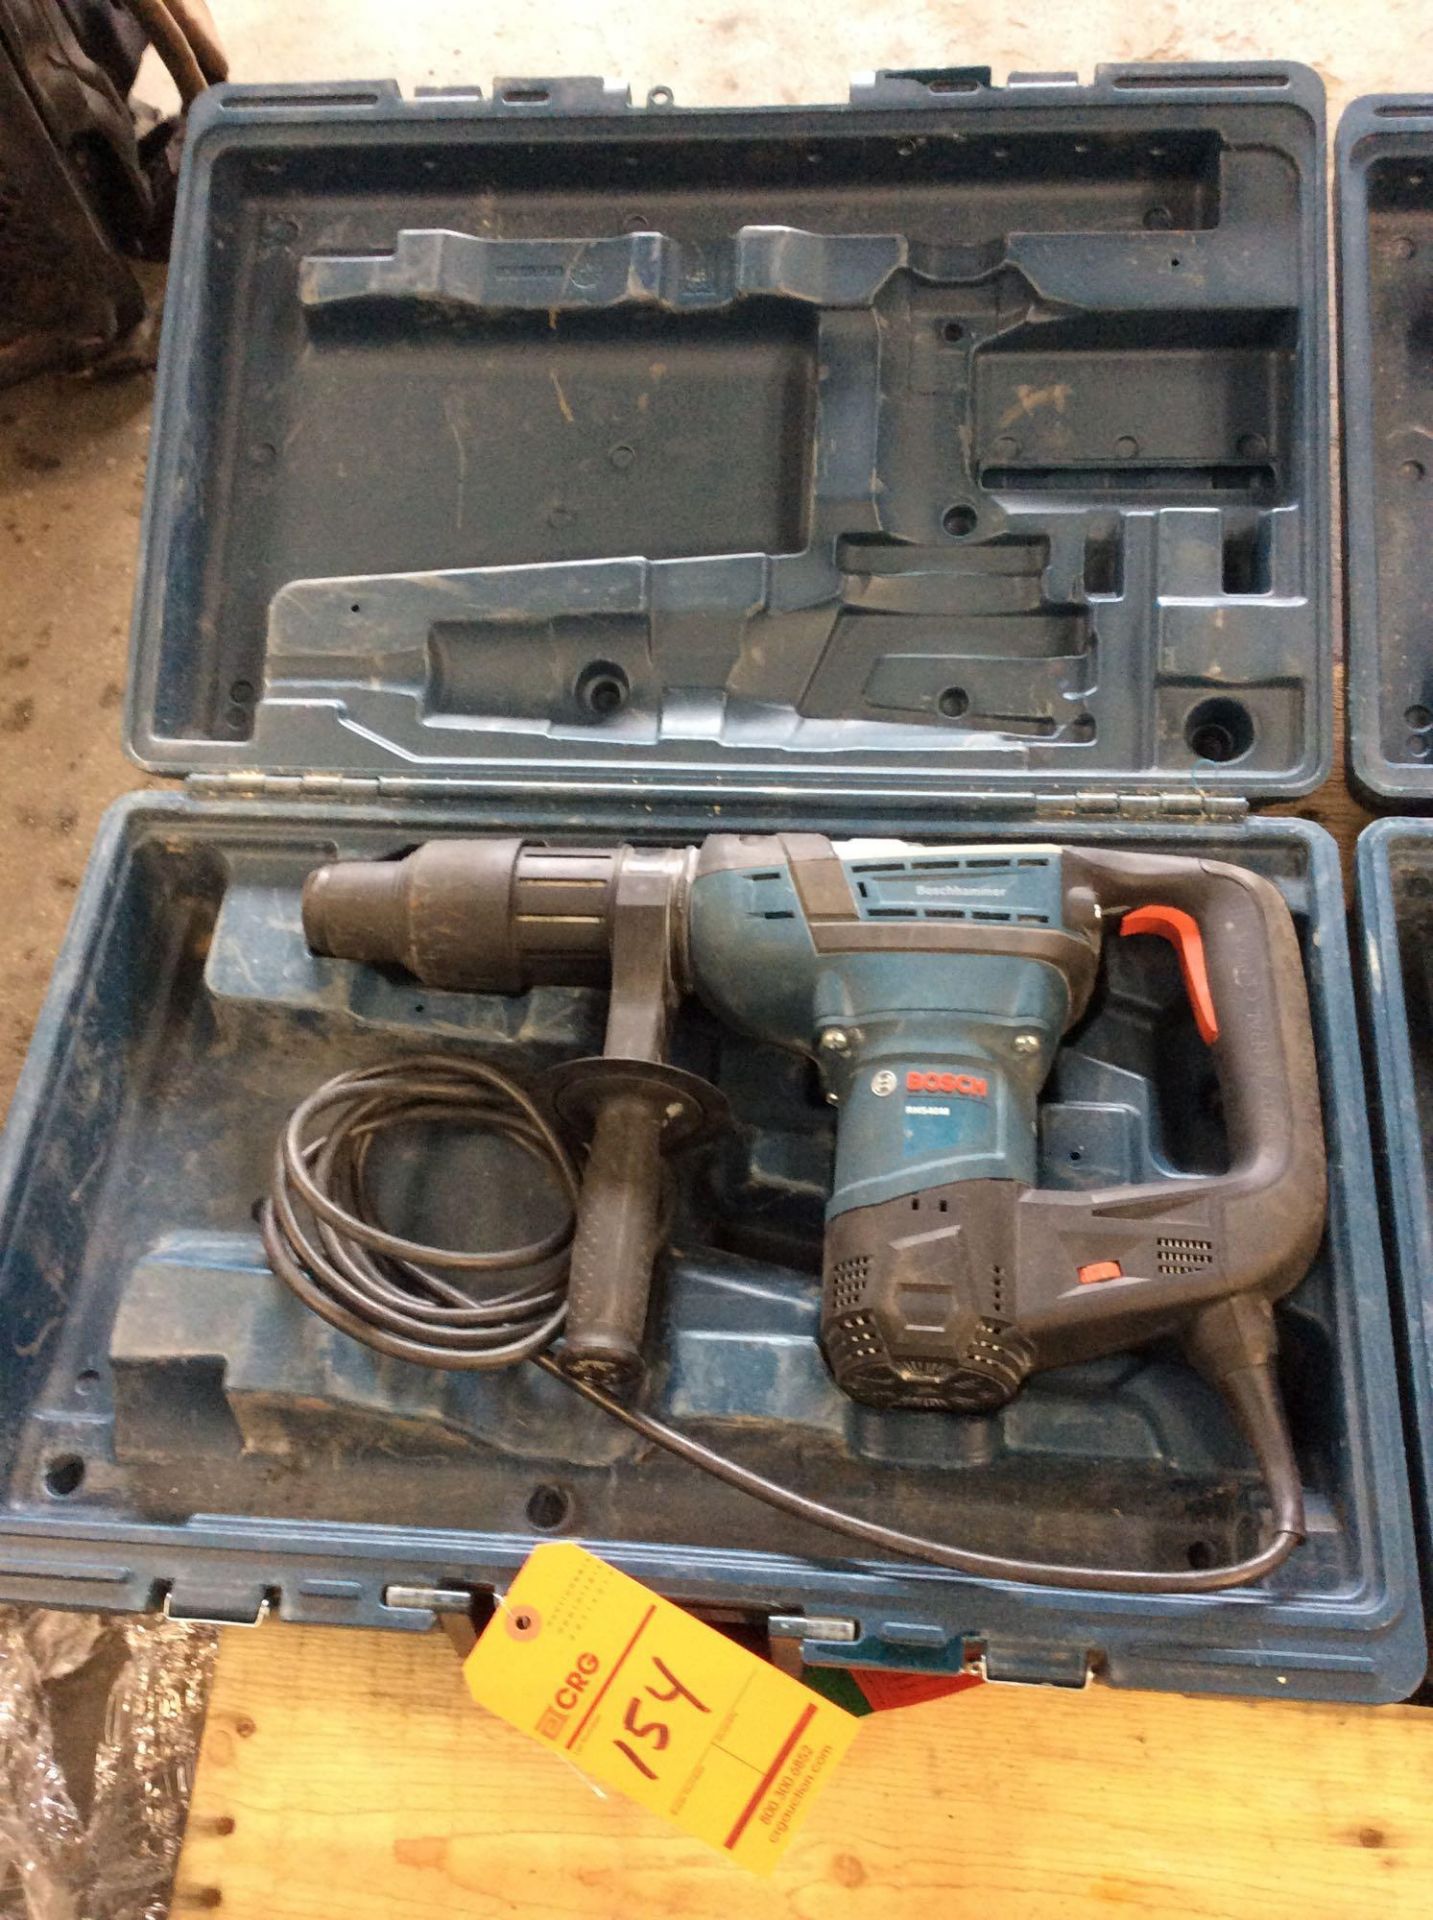 Lot of (2) Bosch Hammer drills, mn RH540M with cases, both turn slowly - Image 2 of 2